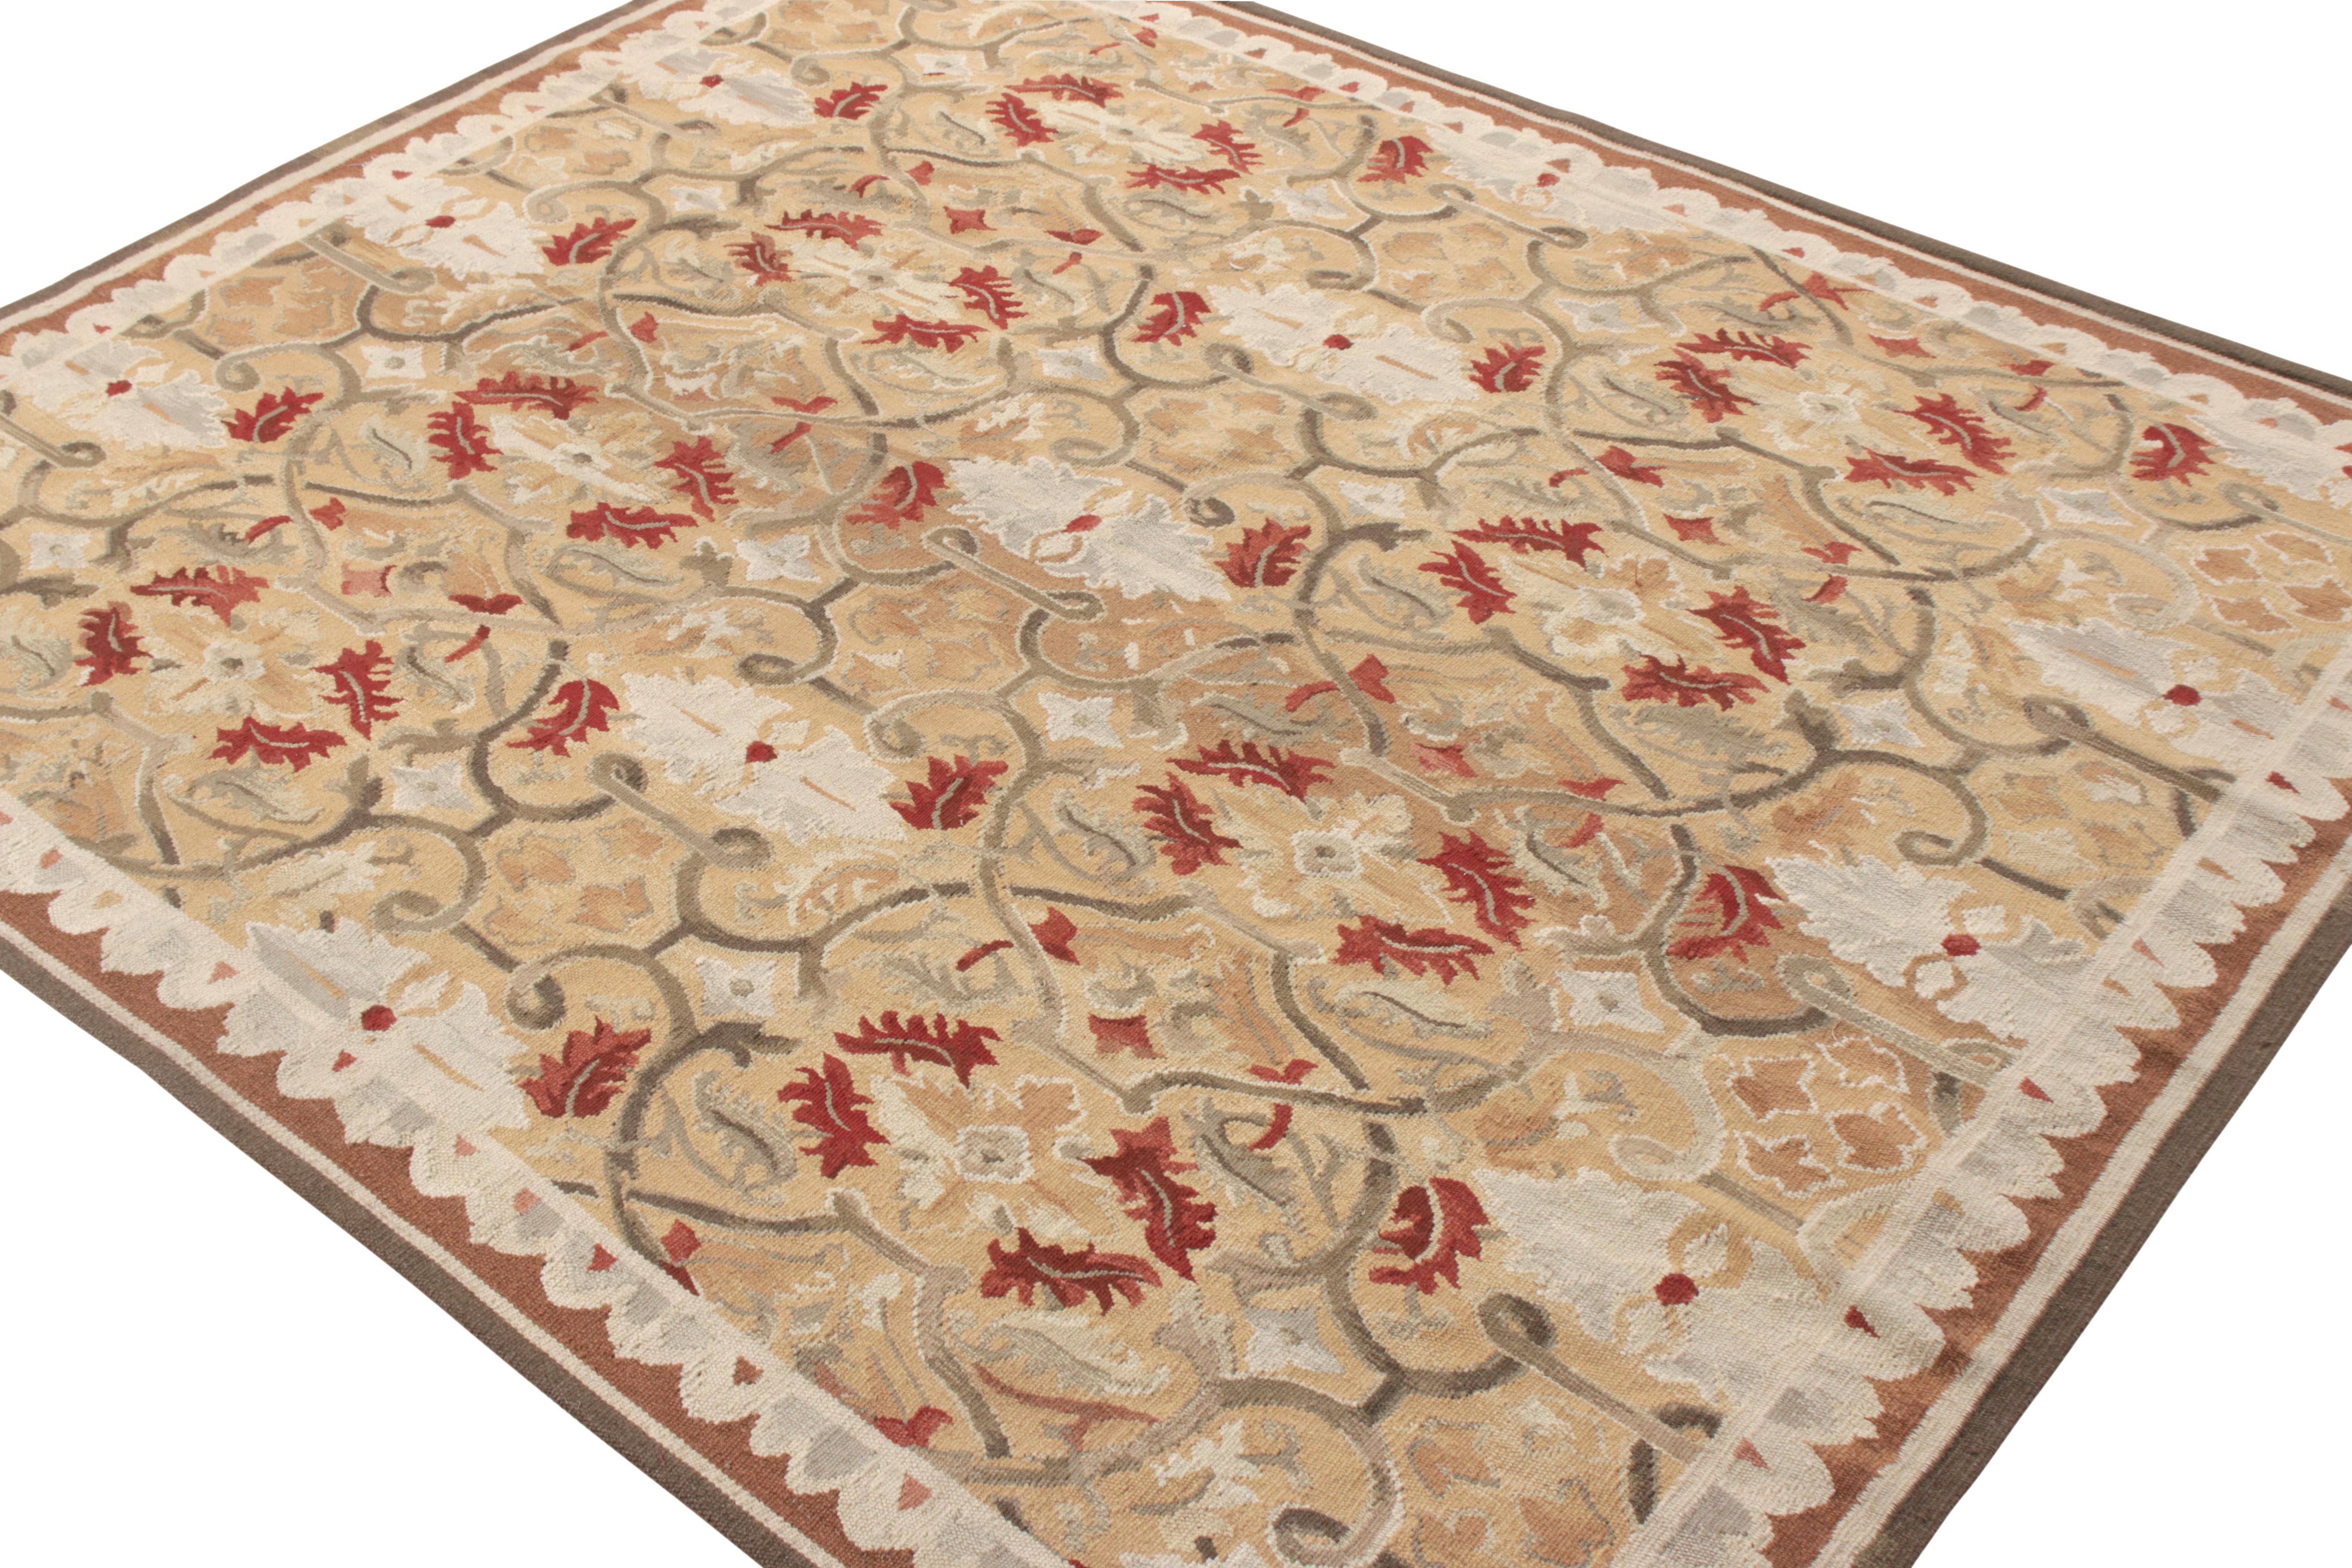 Chinese Rug & Kilim’s Aubusson Flat Weave Style Rug, Beige, Gray and Red Floral Pattern For Sale